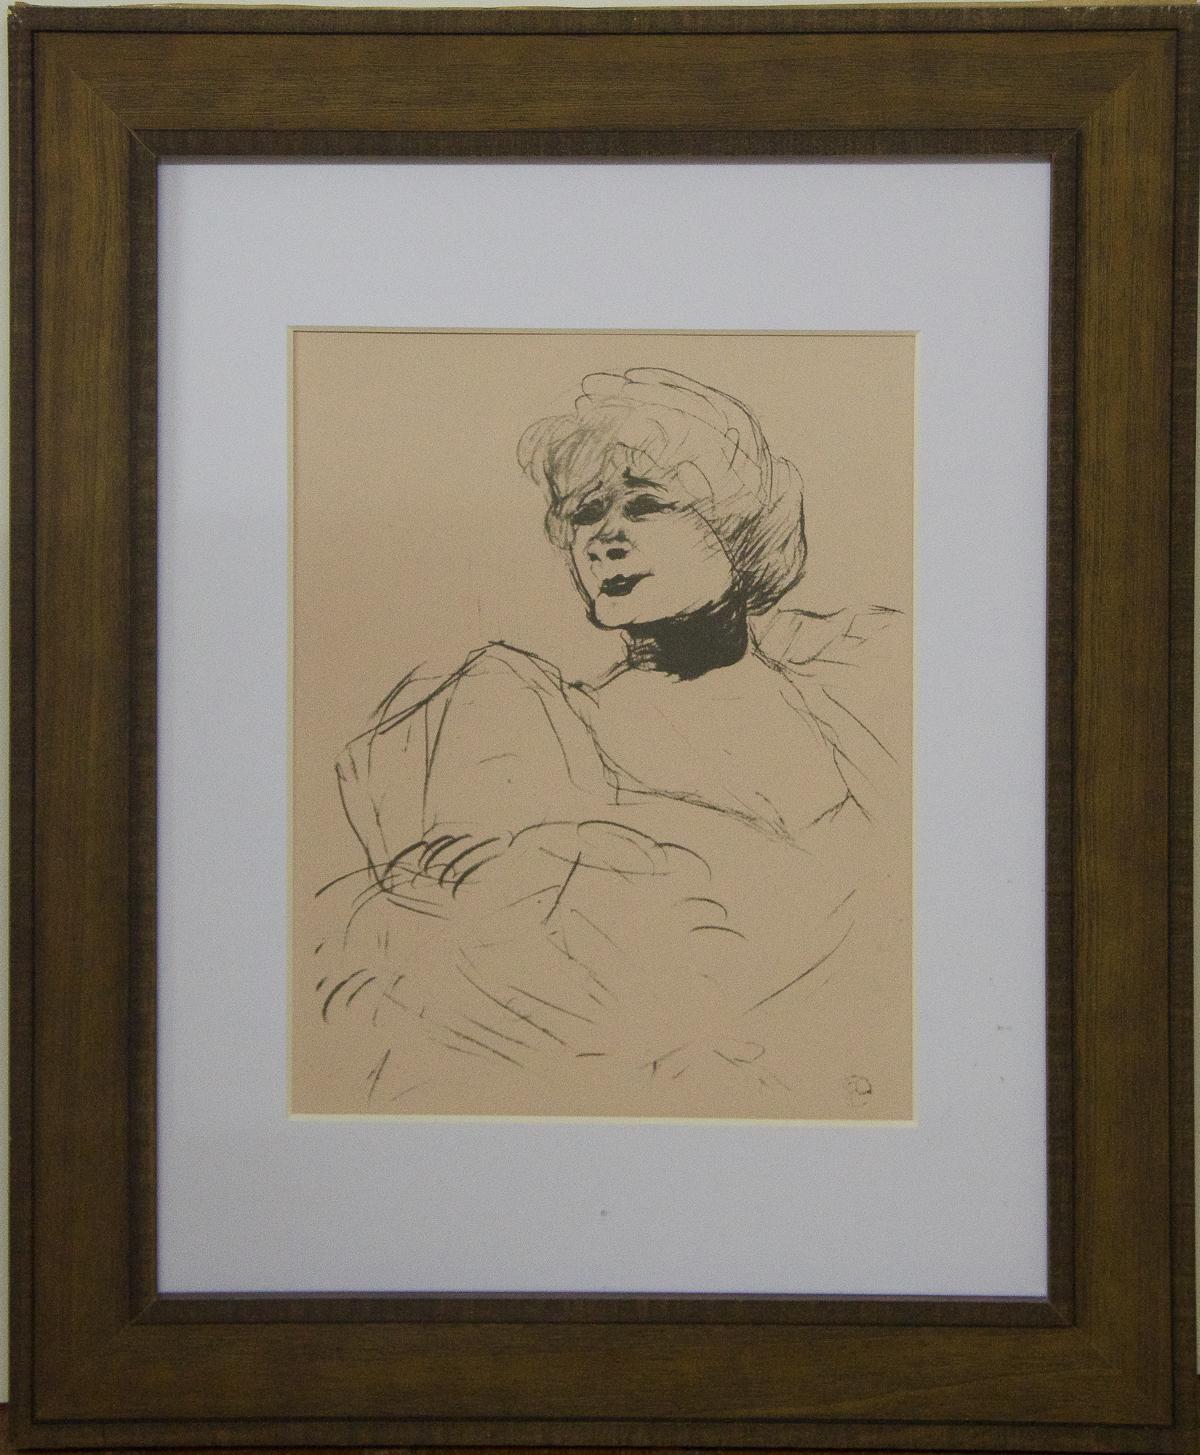 Unknown Portrait - Framed Lithographic Etching of Victorian Styled Woman by Toulouse Lautrec